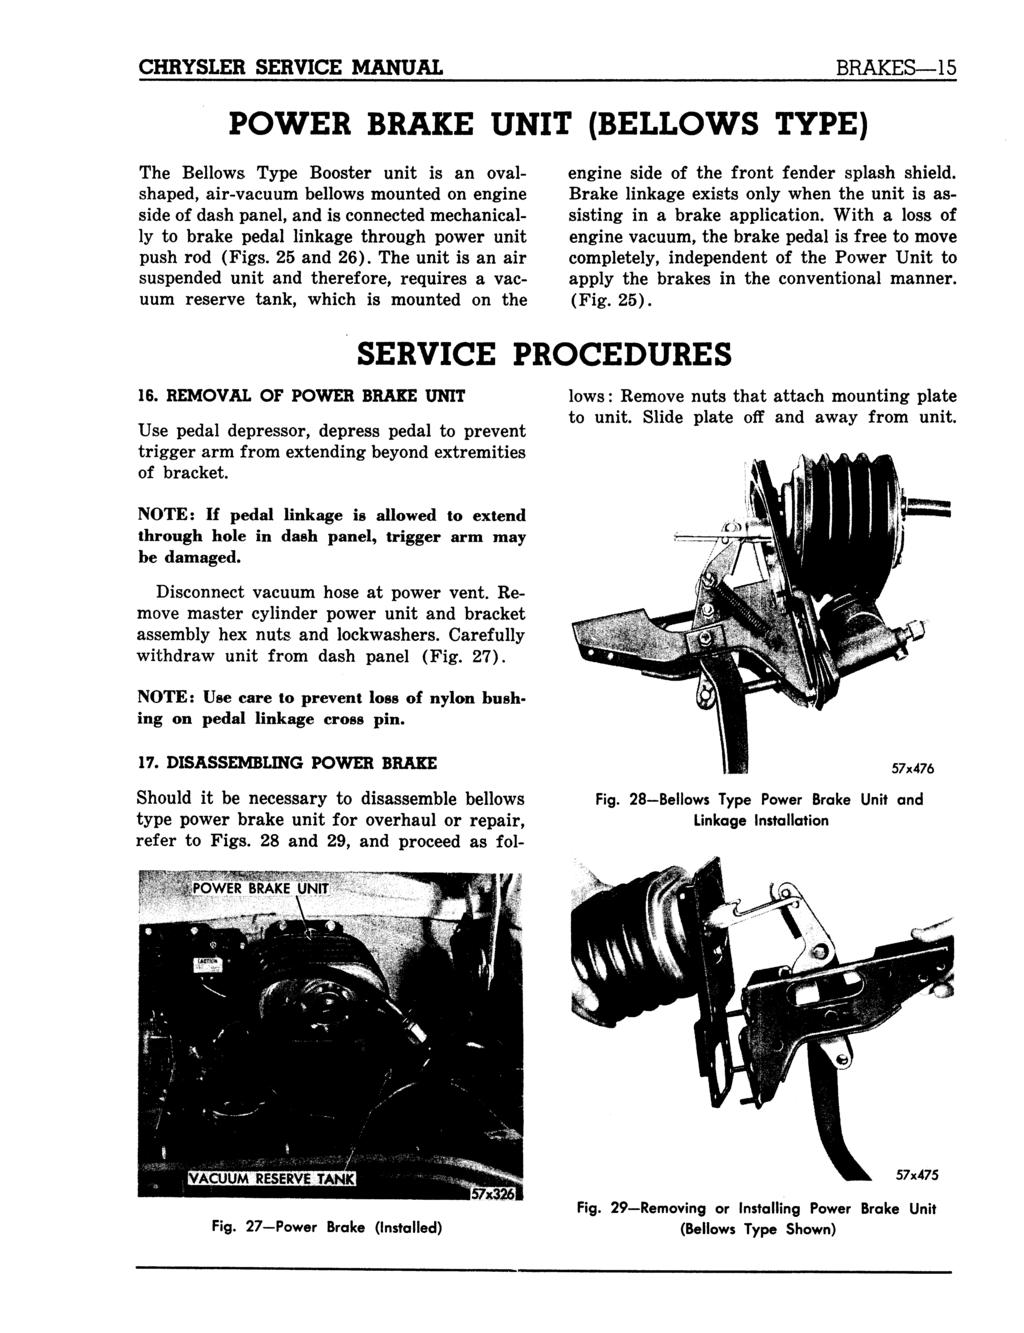 CHRYSLER SERVICE MANUAL BRAKES 15 POWER BRAKE UNIT (BELLOWS TYPE) The Bellows Type Booster unit is an ovalshaped, air-vacuum bellows mounted on engine side of dash panel, and is connected